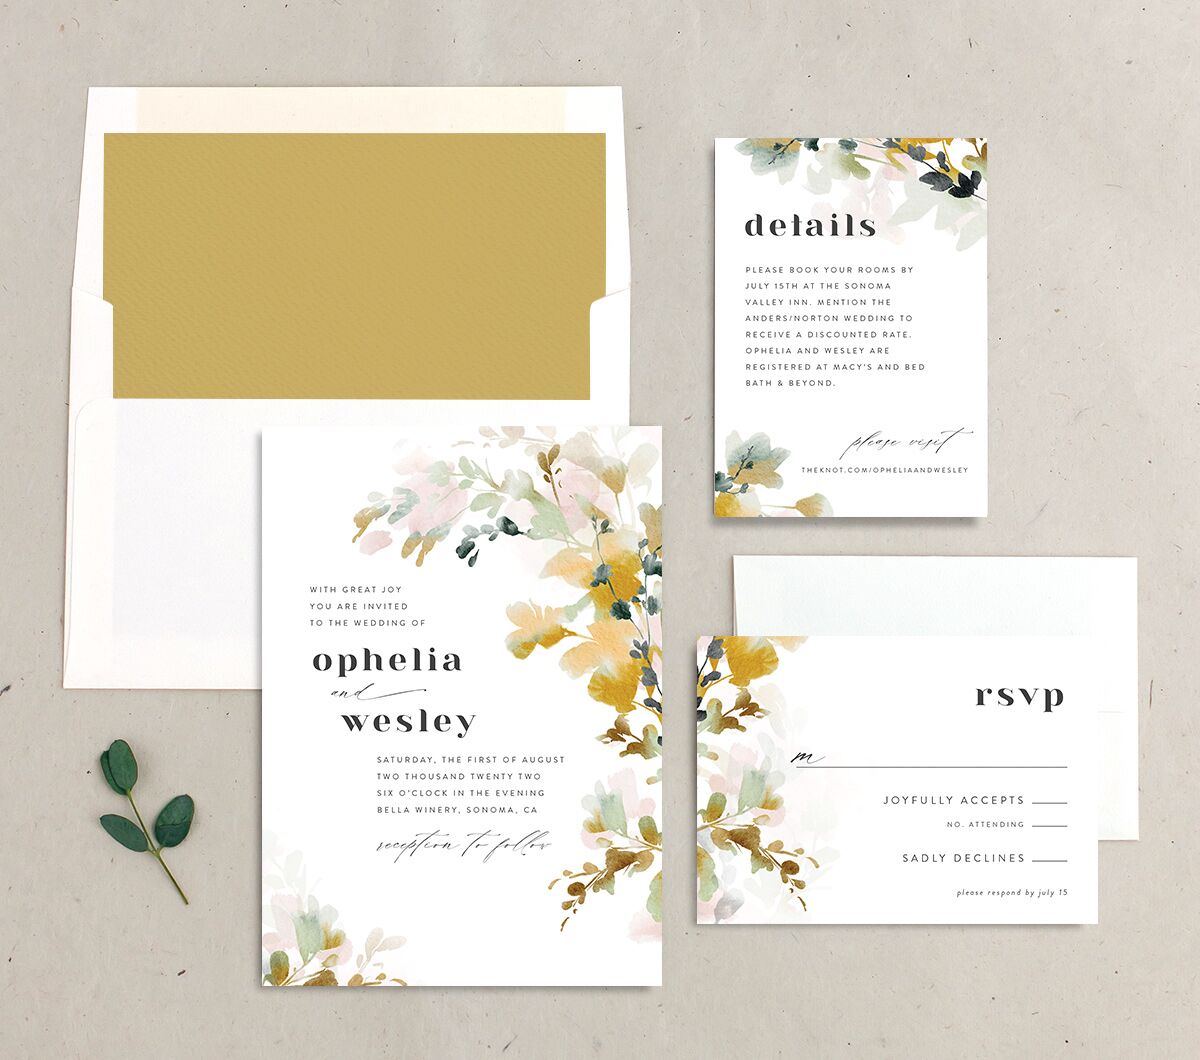 Graceful Floral Wedding Invitations suite in gold